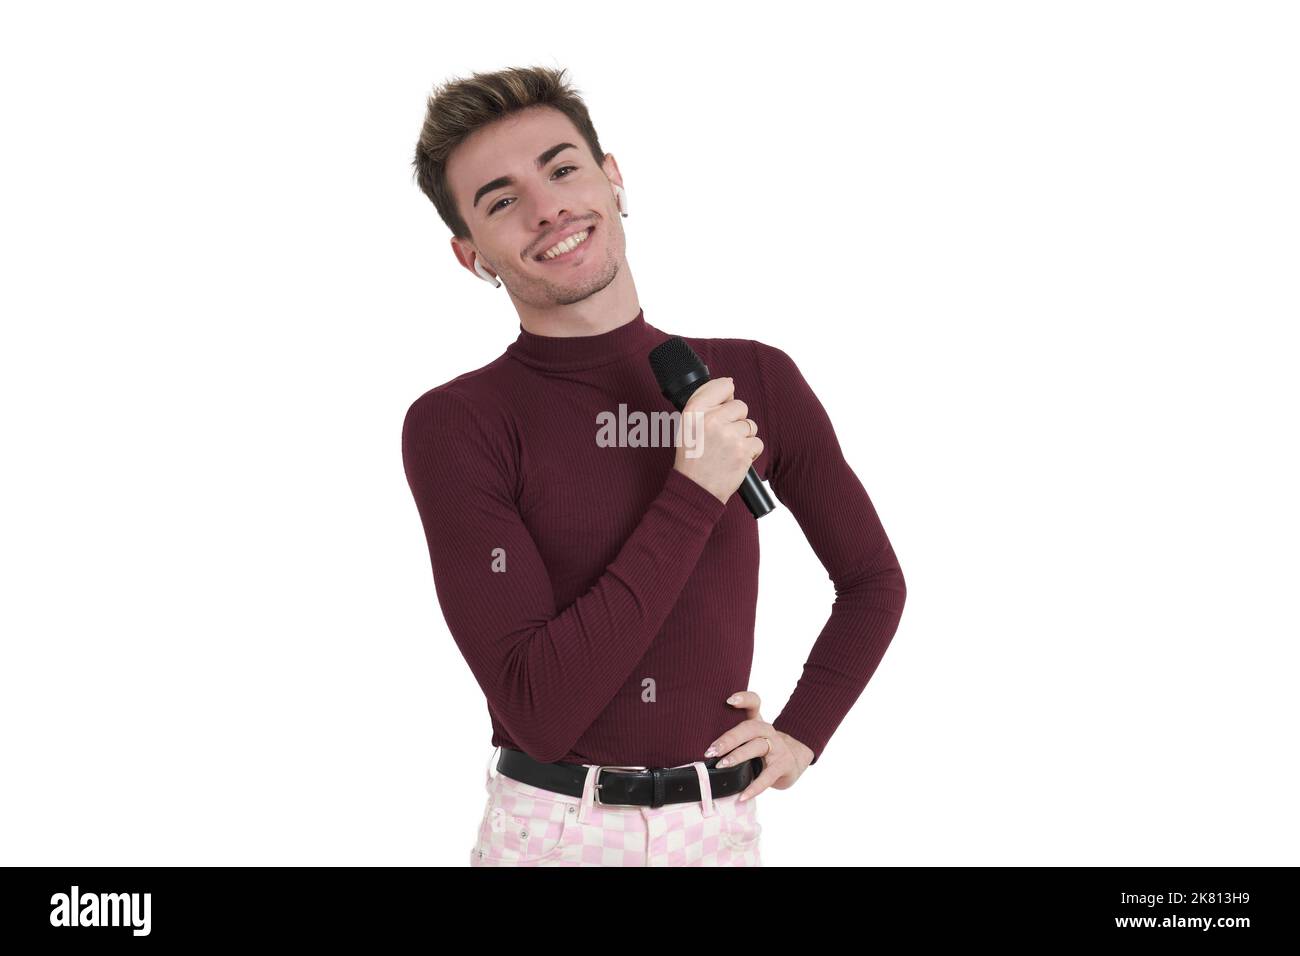 Young caucasian man smiling with a microphone, isolated. Stock Photo